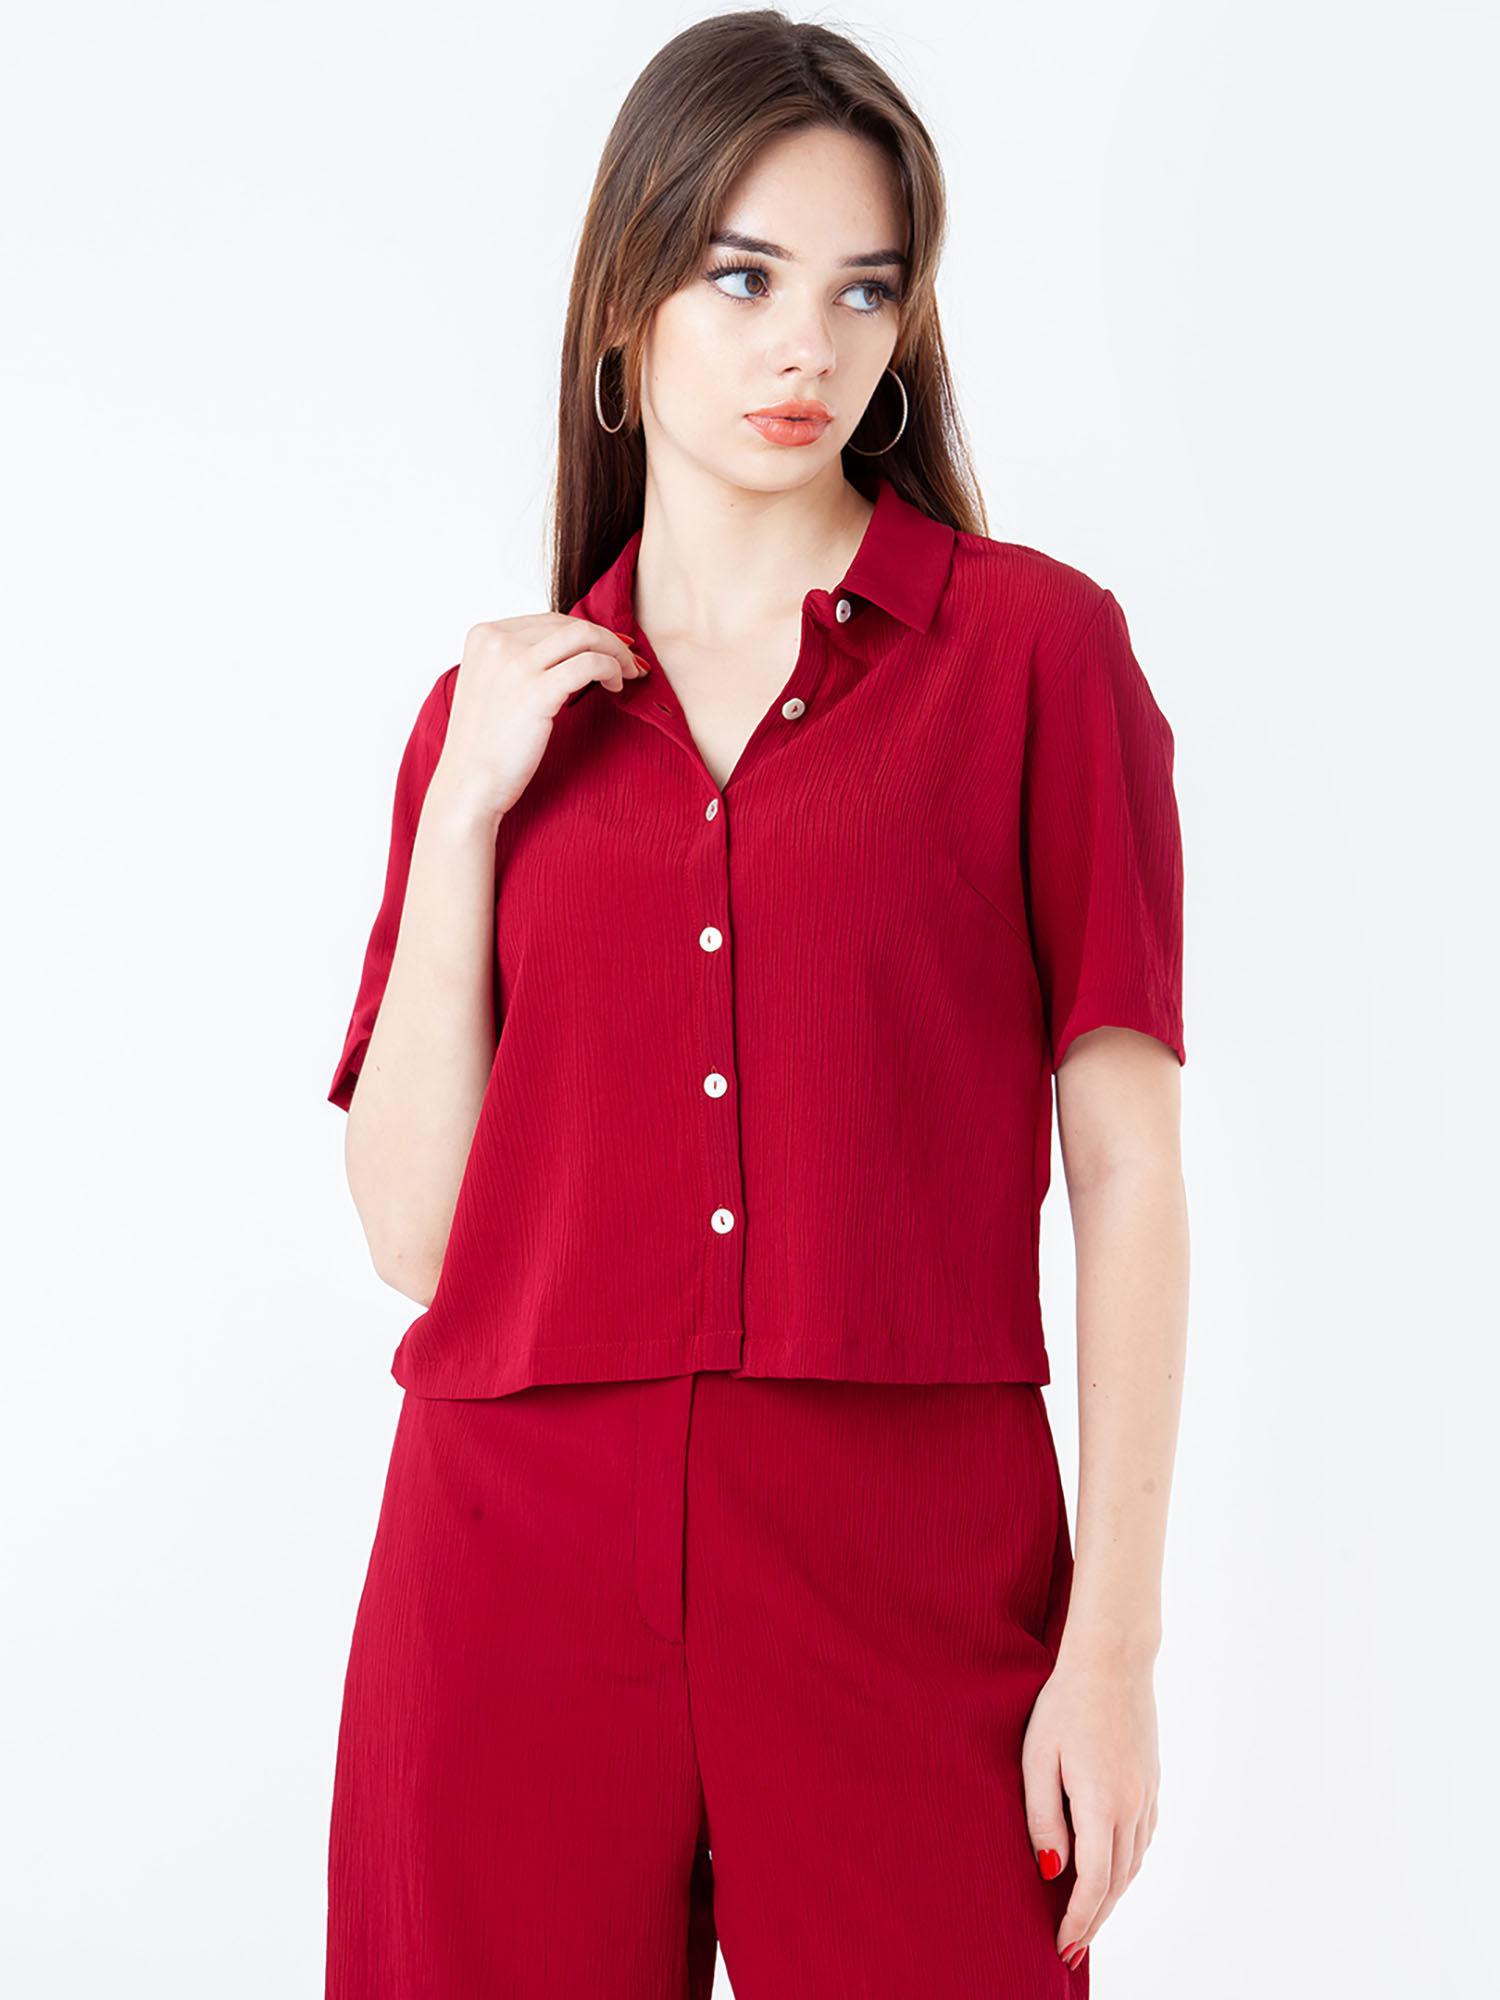 womens red solid/plain shirt